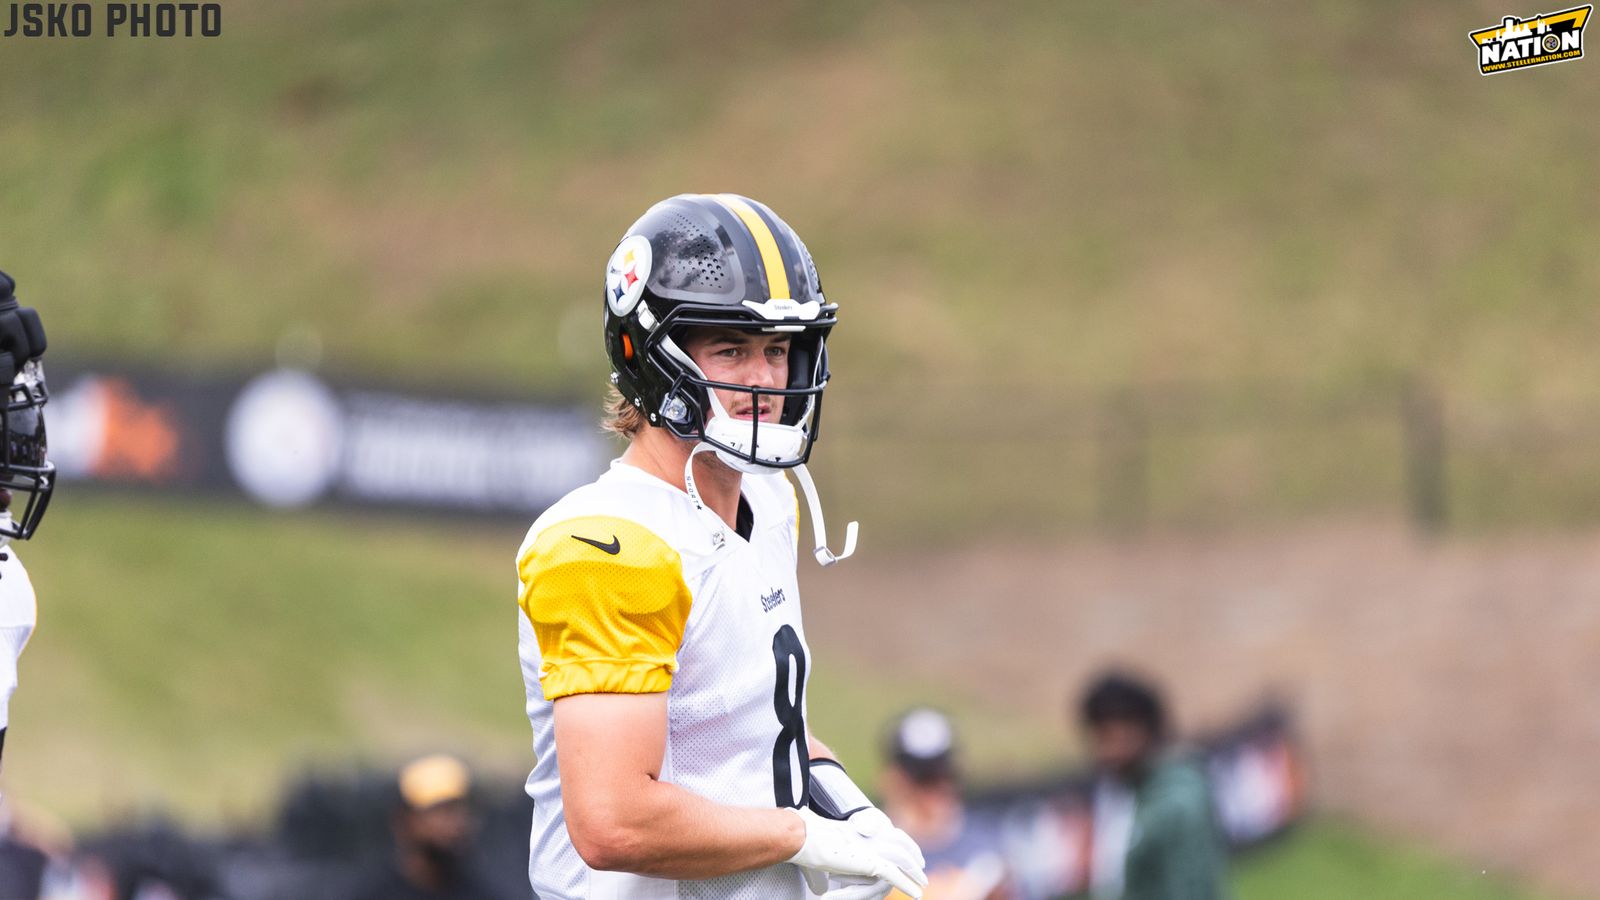 Must-watch players for the Steelers in Week 4